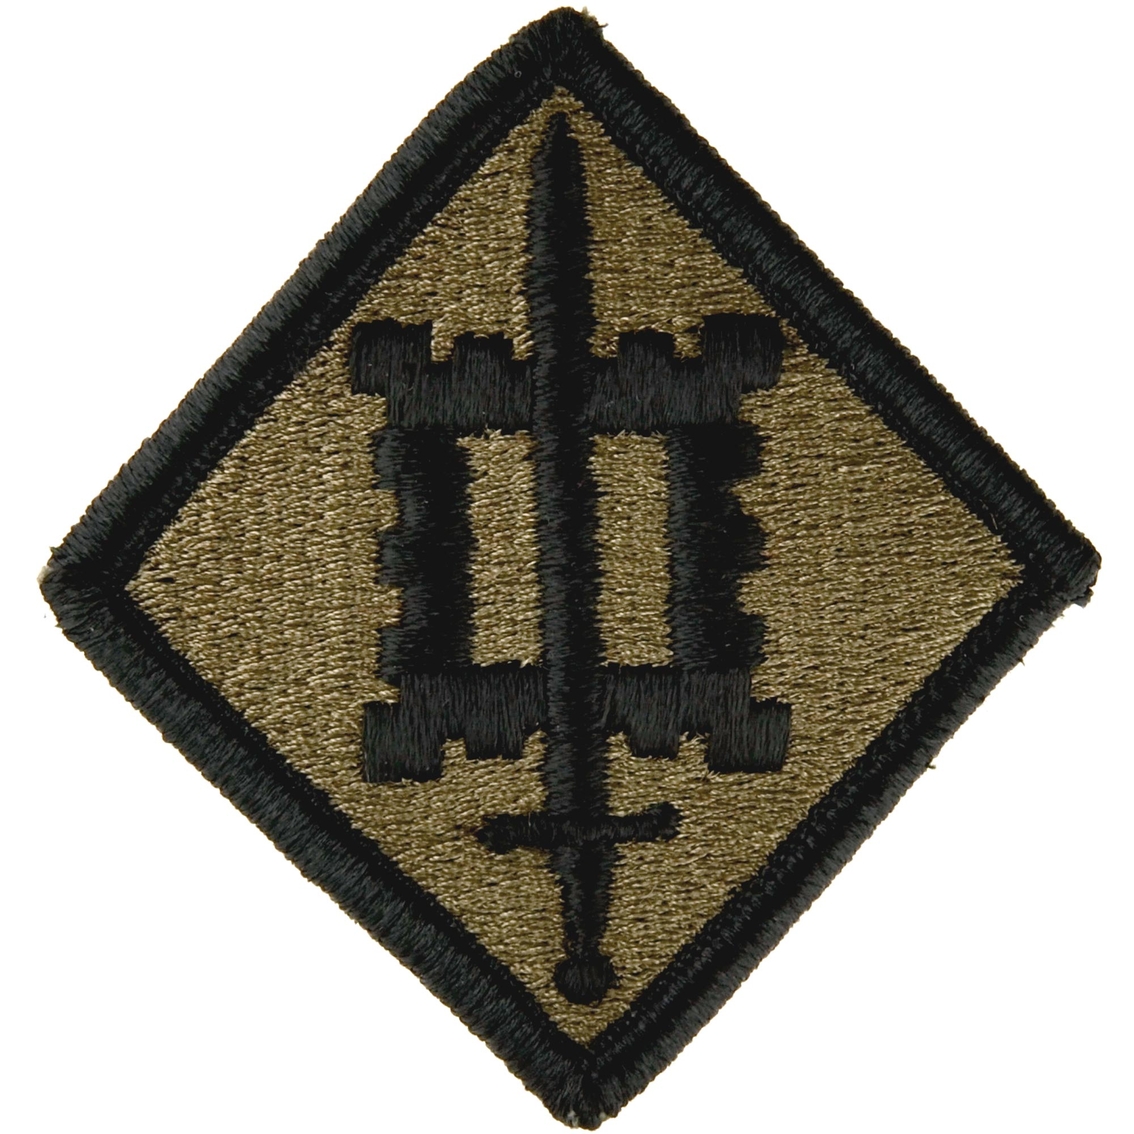 Army Engineer Patch - Army Military